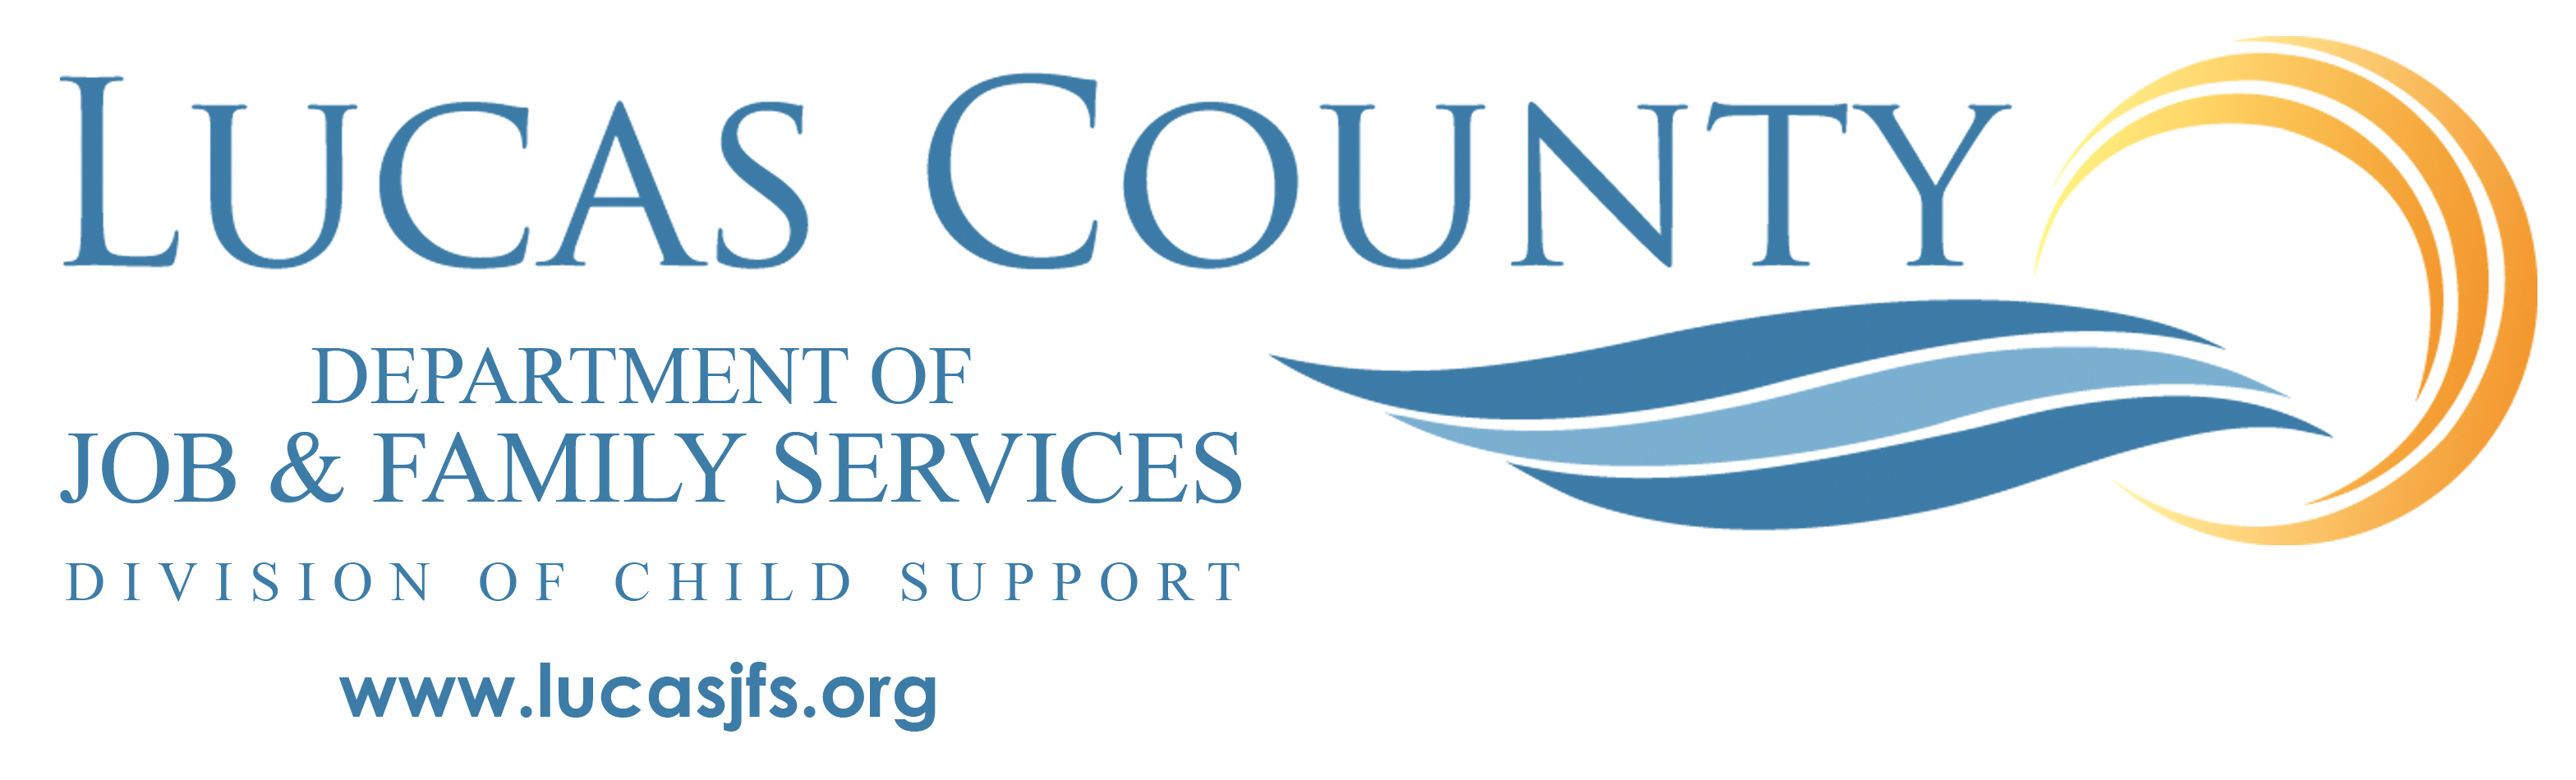 Lucas county ohio department of job and family services